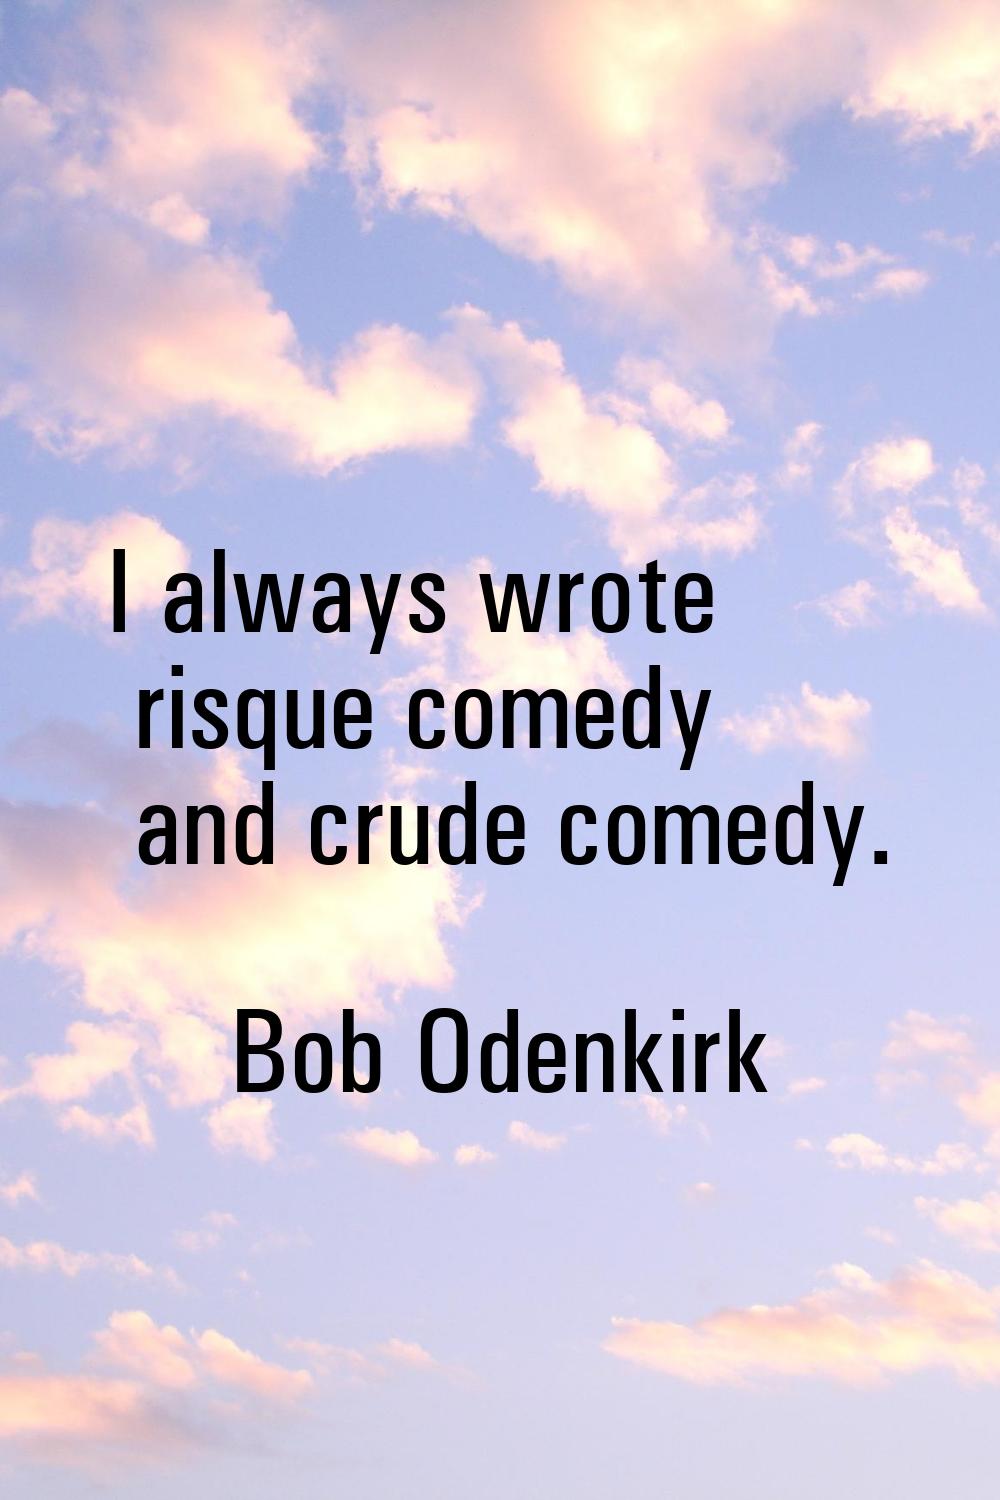 I always wrote risque comedy and crude comedy.